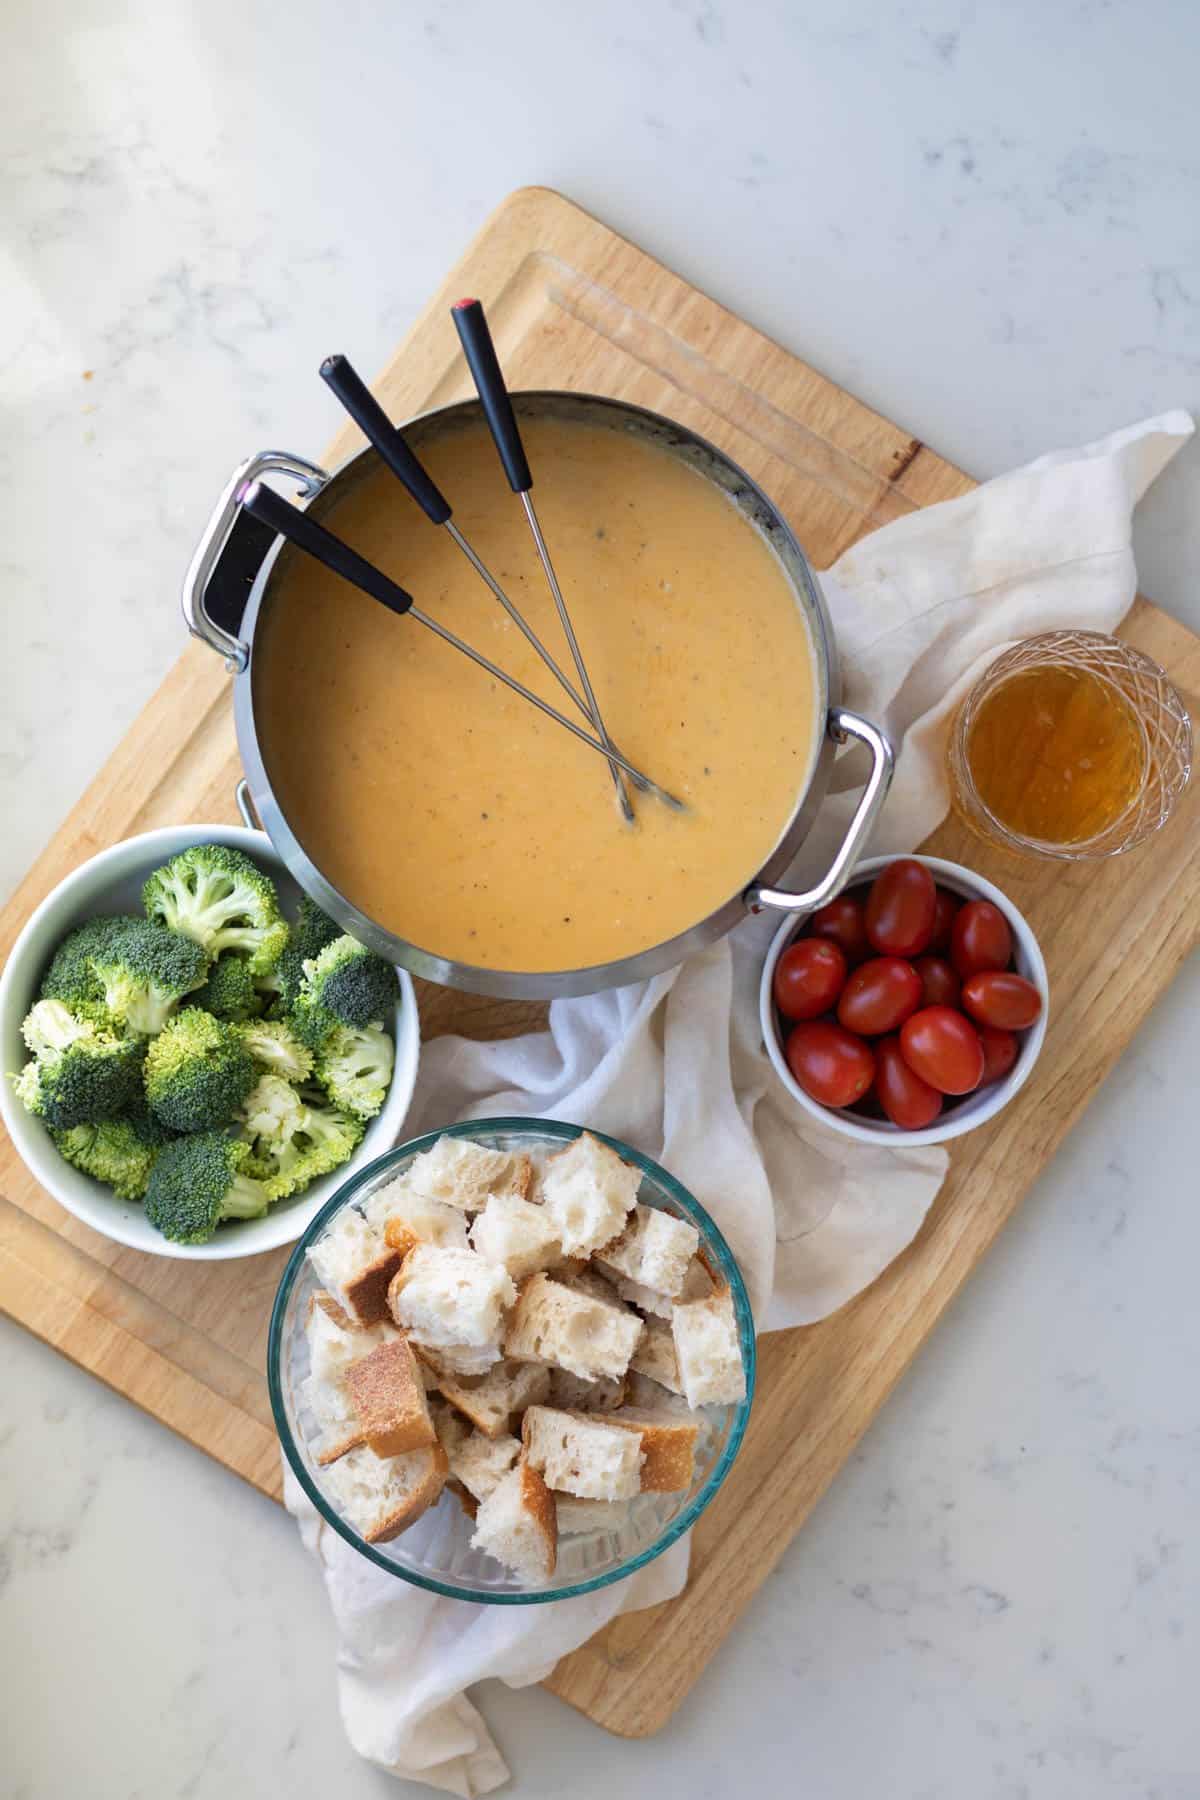 a wooden board with cheese fondue on it along with broccoli, bread cubes, tomatoes, and a glass of beer